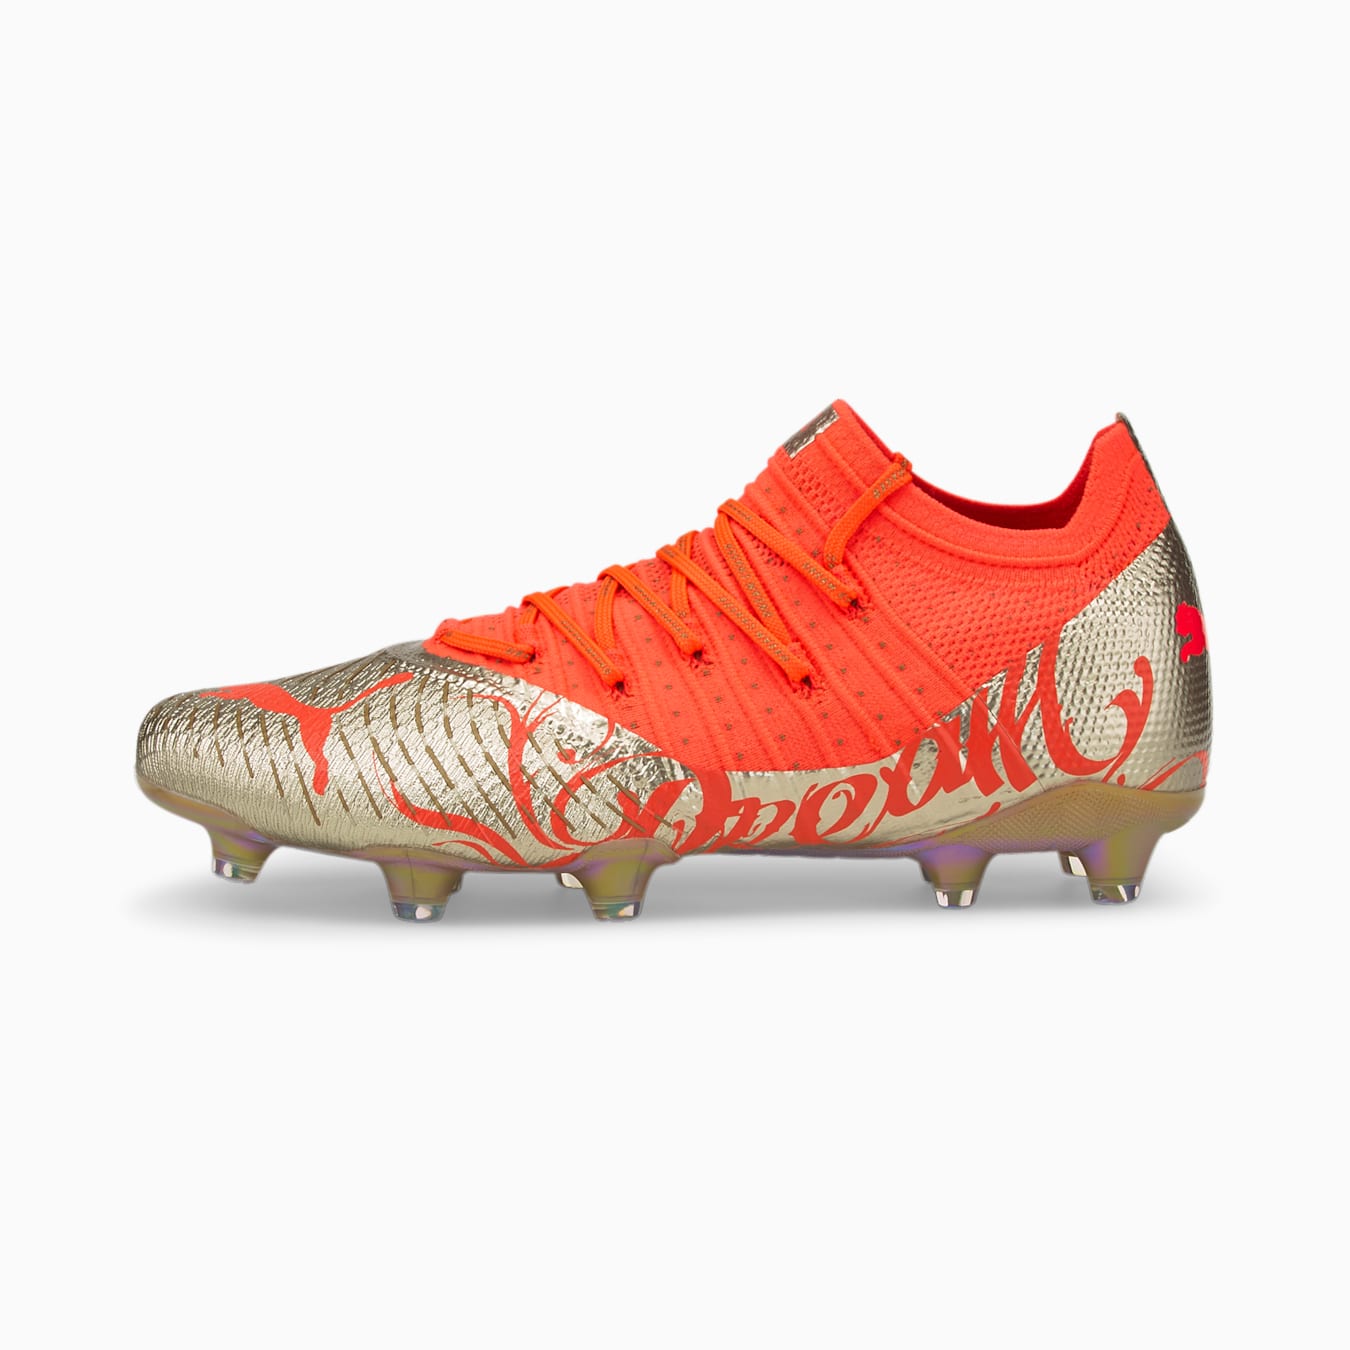 FUTURE 1.4 Jr Player's Edition FG/AG Football Boots